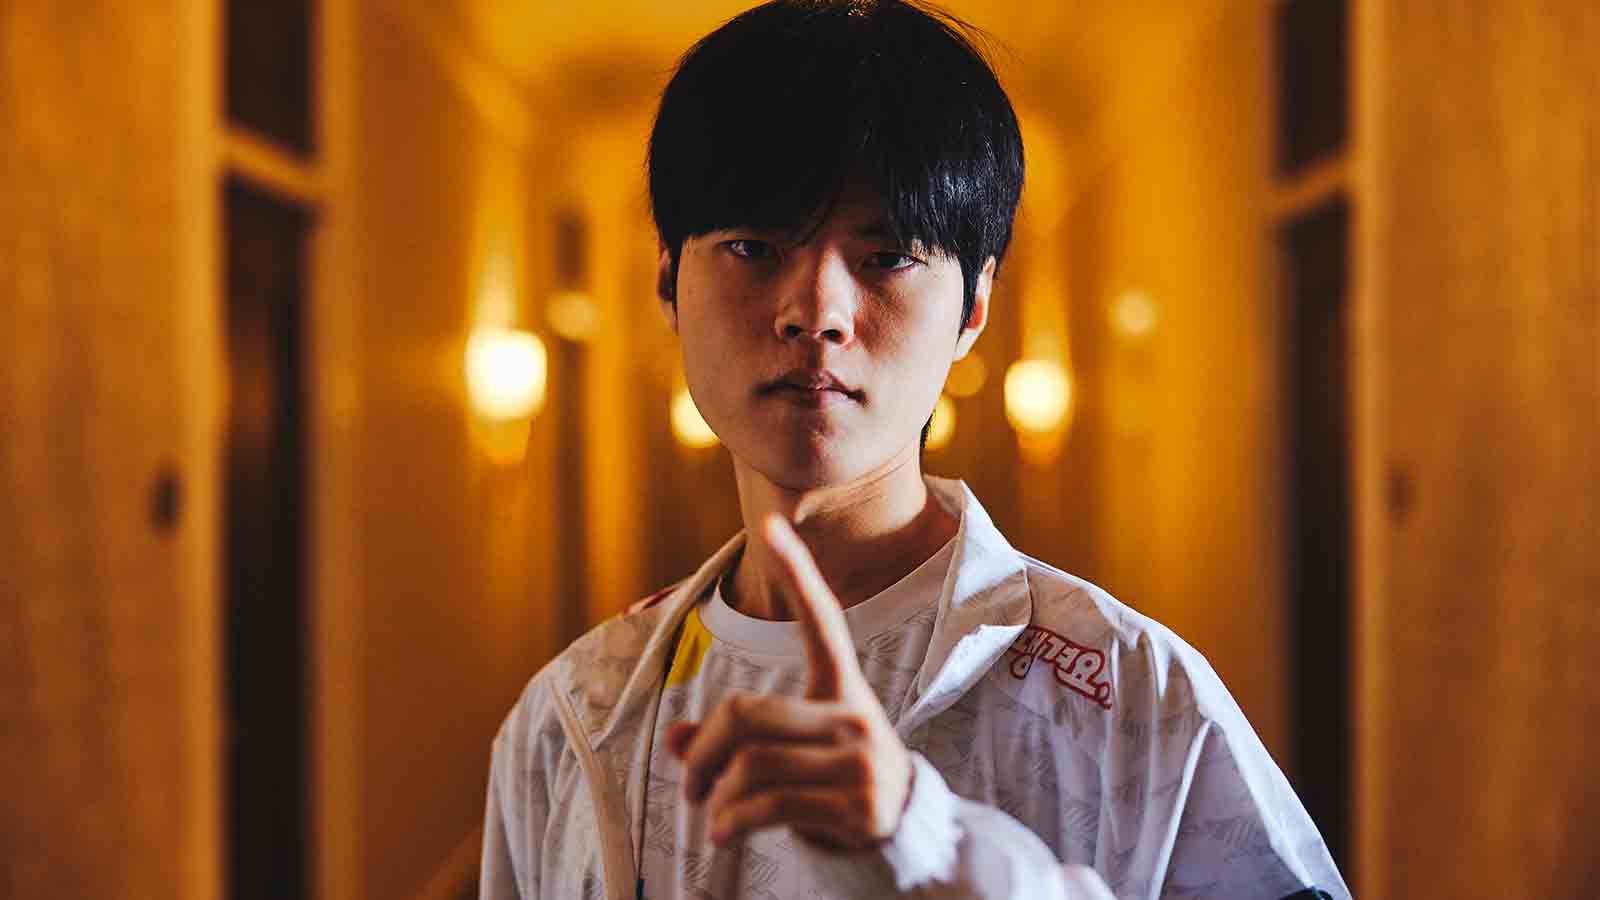 Deft eliminated from Worlds 2023 